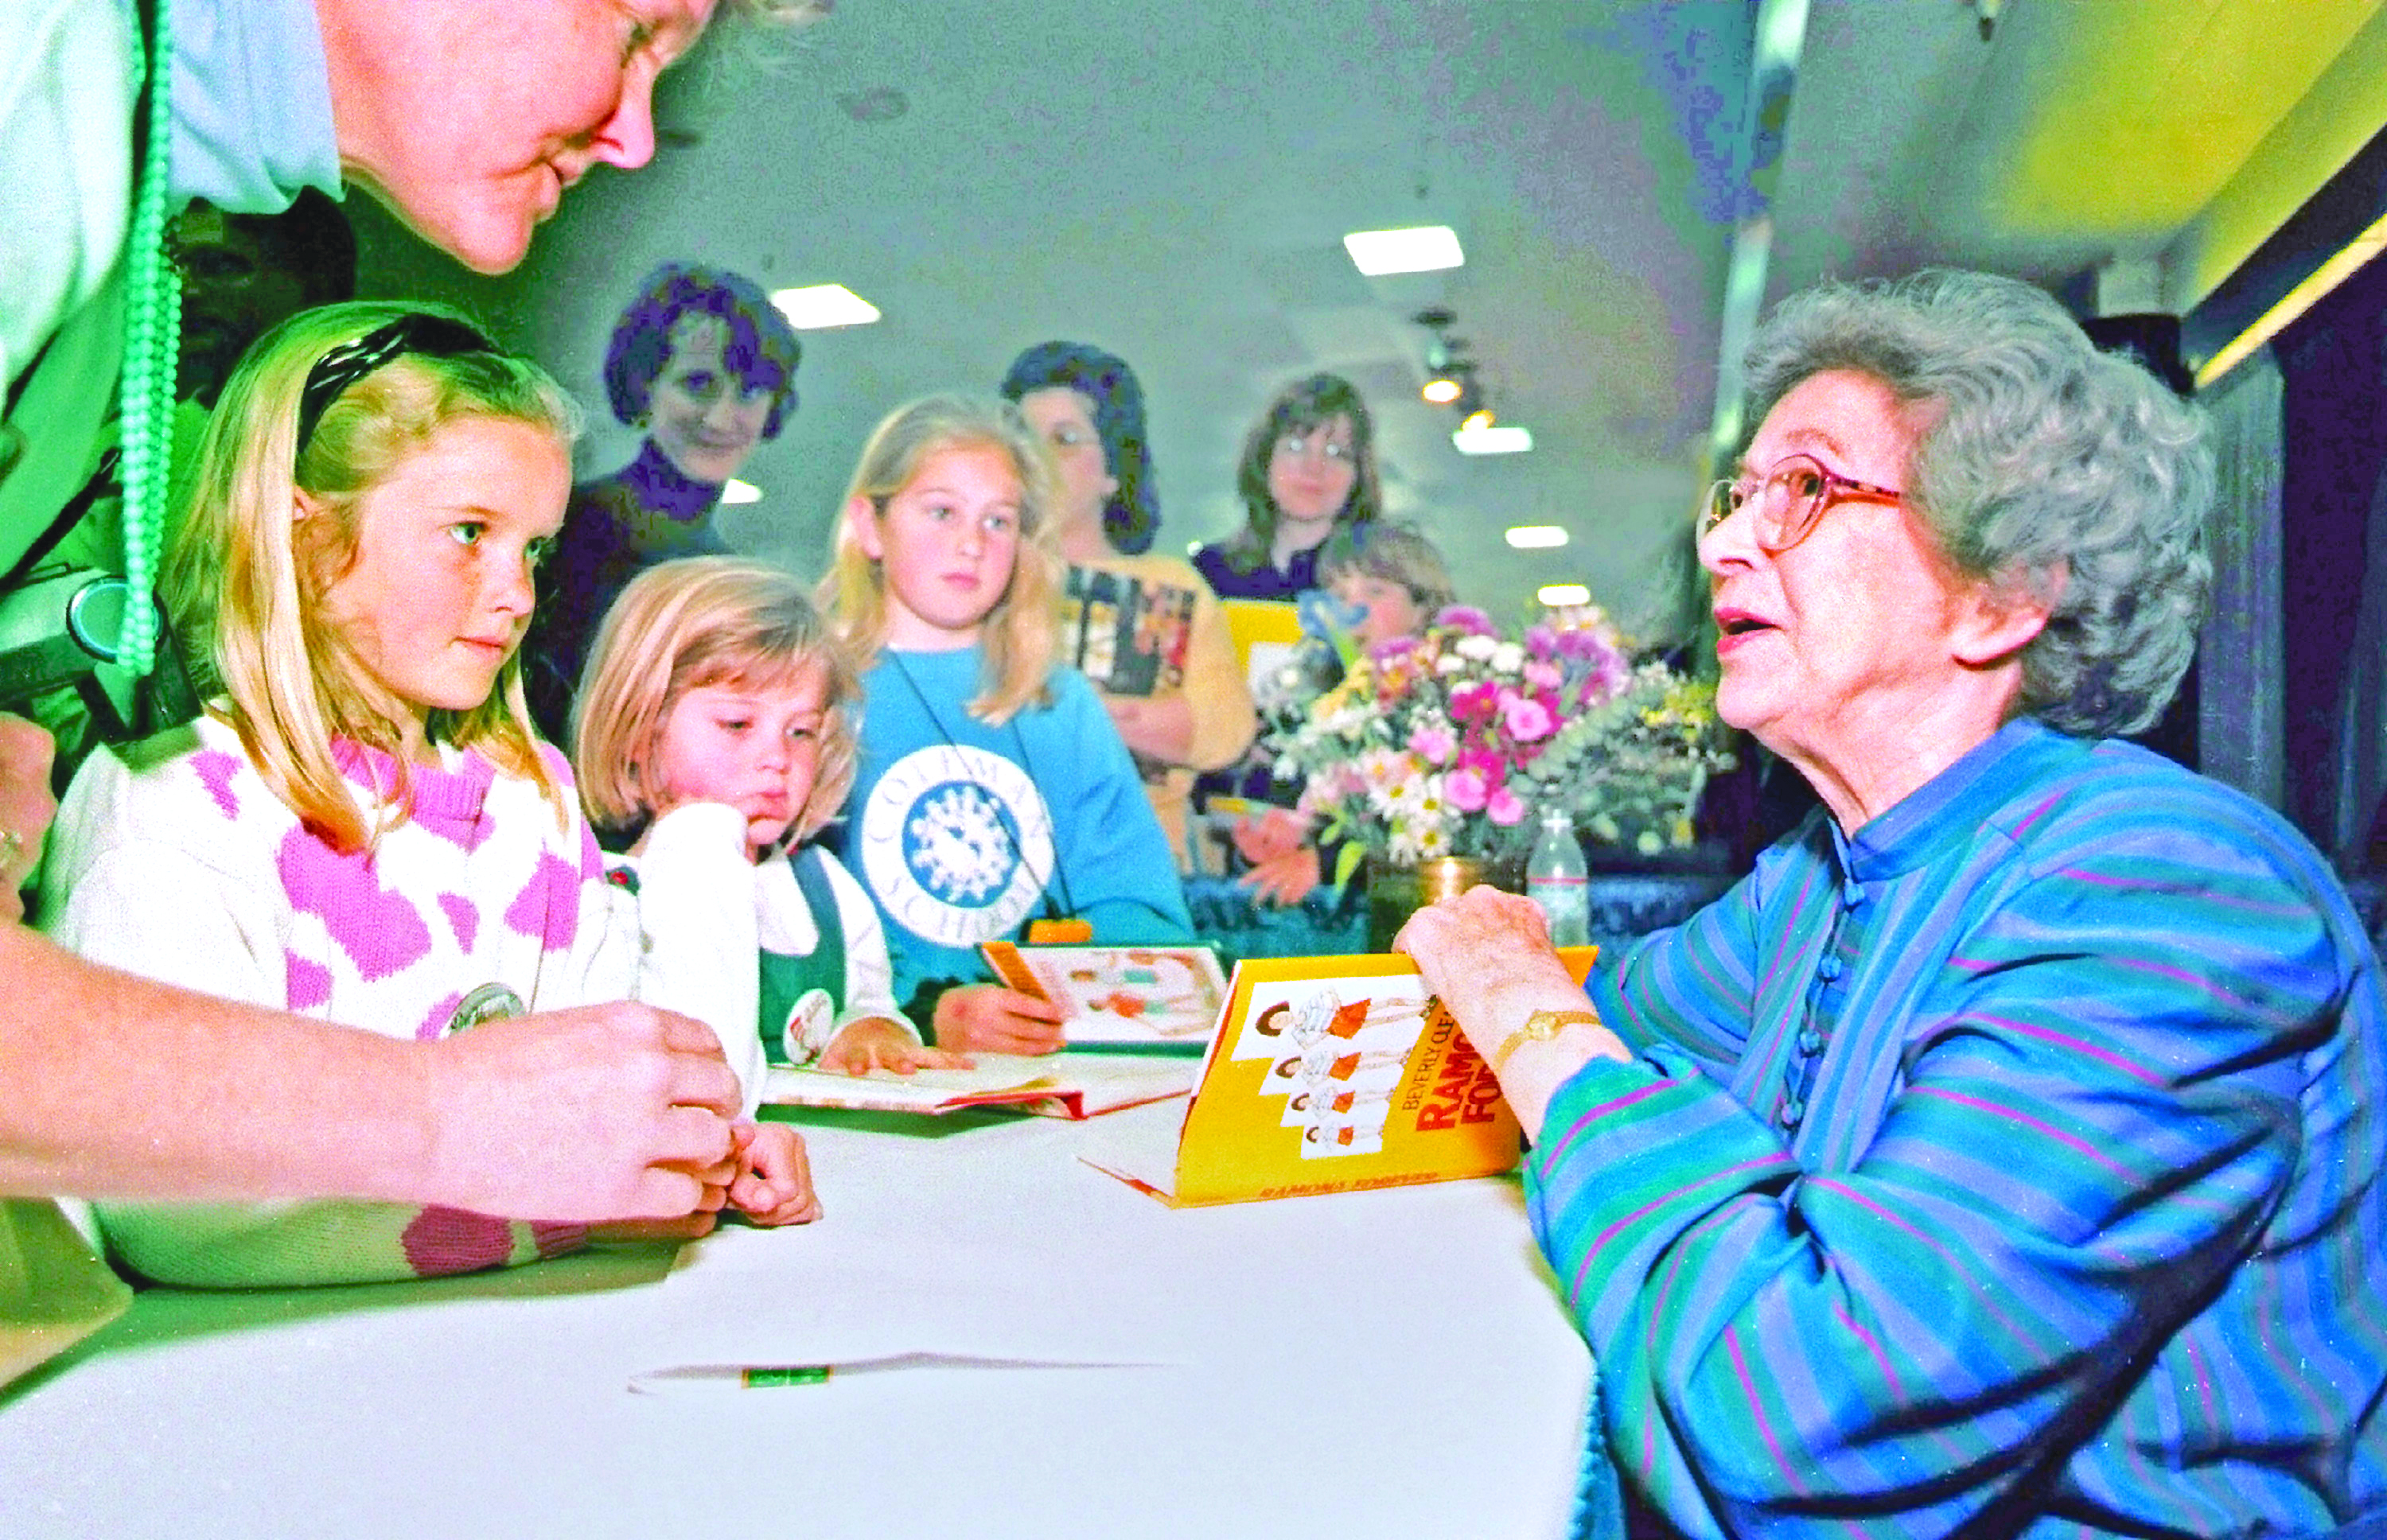 beloved-childrens-author-beverly-cleary-dies-at-104